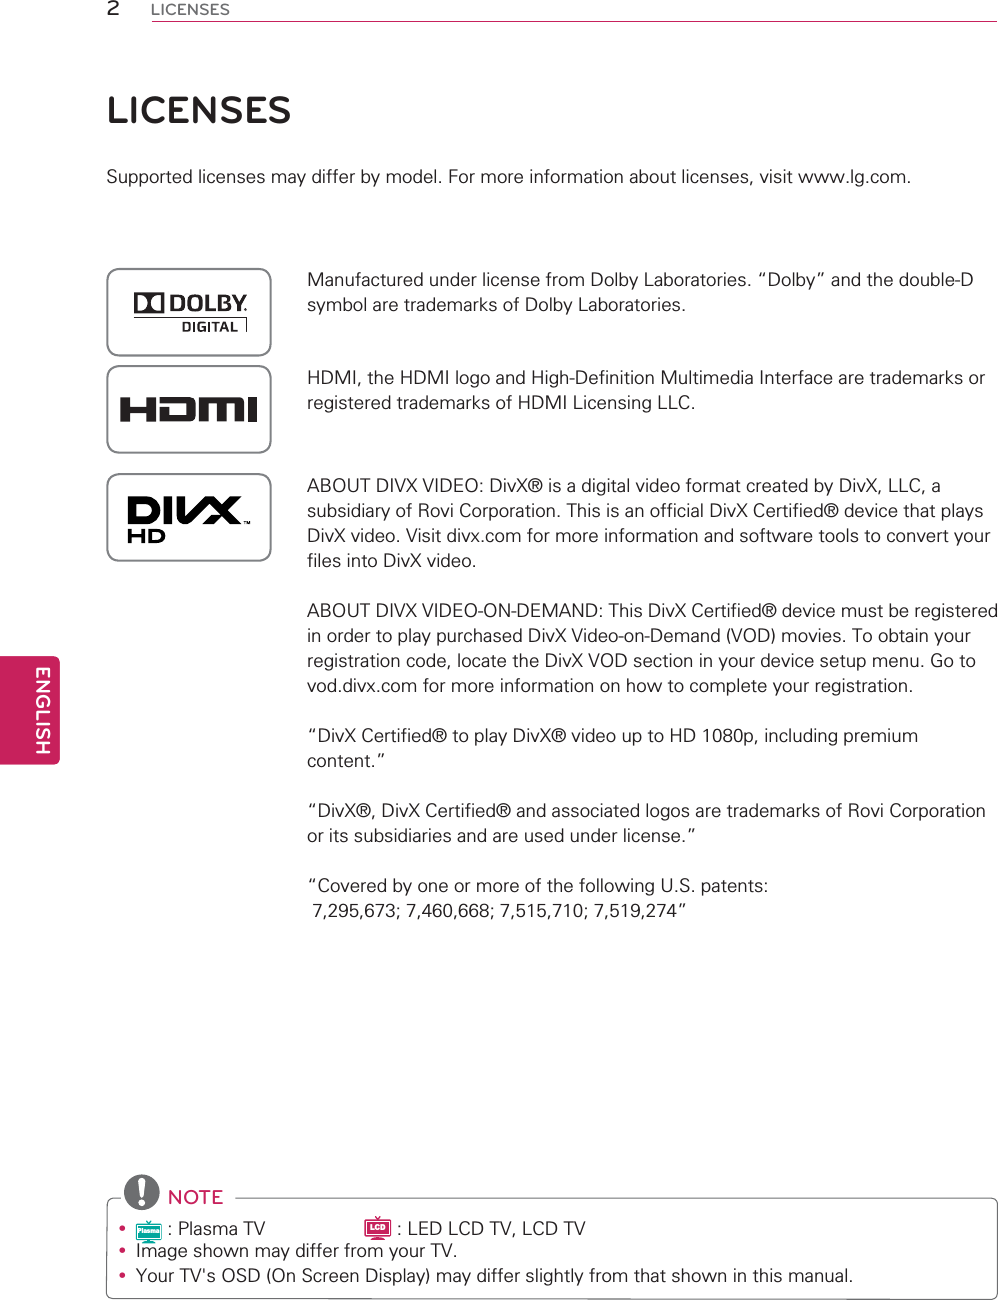 2ENGENGLISHLICENSESLICENSESSupported licenses may differ by model. For more information about licenses, visit www.lg.com.Manufactured under license from Dolby Laboratories. “Dolby” and the double-D symbol are trademarks of Dolby Laboratories.HDMI, the HDMI logo and High-Definition Multimedia Interface are trademarks or registered trademarks of HDMI Licensing LLC.ABOUT DIVX VIDEO: DivX® is a digital video format created by DivX, LLC, a subsidiary of Rovi Corporation. This is an official DivX Certified® device that plays DivX video. Visit divx.com for more information and software tools to convert your files into DivX video.ABOUT DIVX VIDEO-ON-DEMAND: This DivX Certified® device must be registered in order to play purchased DivX Video-on-Demand (VOD) movies. To obtain your registration code, locate the DivX VOD section in your device setup menu. Go to vod.divx.com for more information on how to complete your registration.“DivX Certified® to play DivX® video up to HD 1080p, including premium content.”“DivX®, DivX Certified® and associated logos are trademarks of Rovi Corporation or its subsidiaries and are used under license.”“Covered by one or more of the following U.S. patents: 7,295,673; 7,460,668; 7,515,710; 7,519,274” NOTEyPlasma : Plasma TV                   LCD : LED LCD TV, LCD TVy Image shown may differ from your TV.y Your TV&apos;s OSD (On Screen Display) may differ slightly from that shown in this manual.